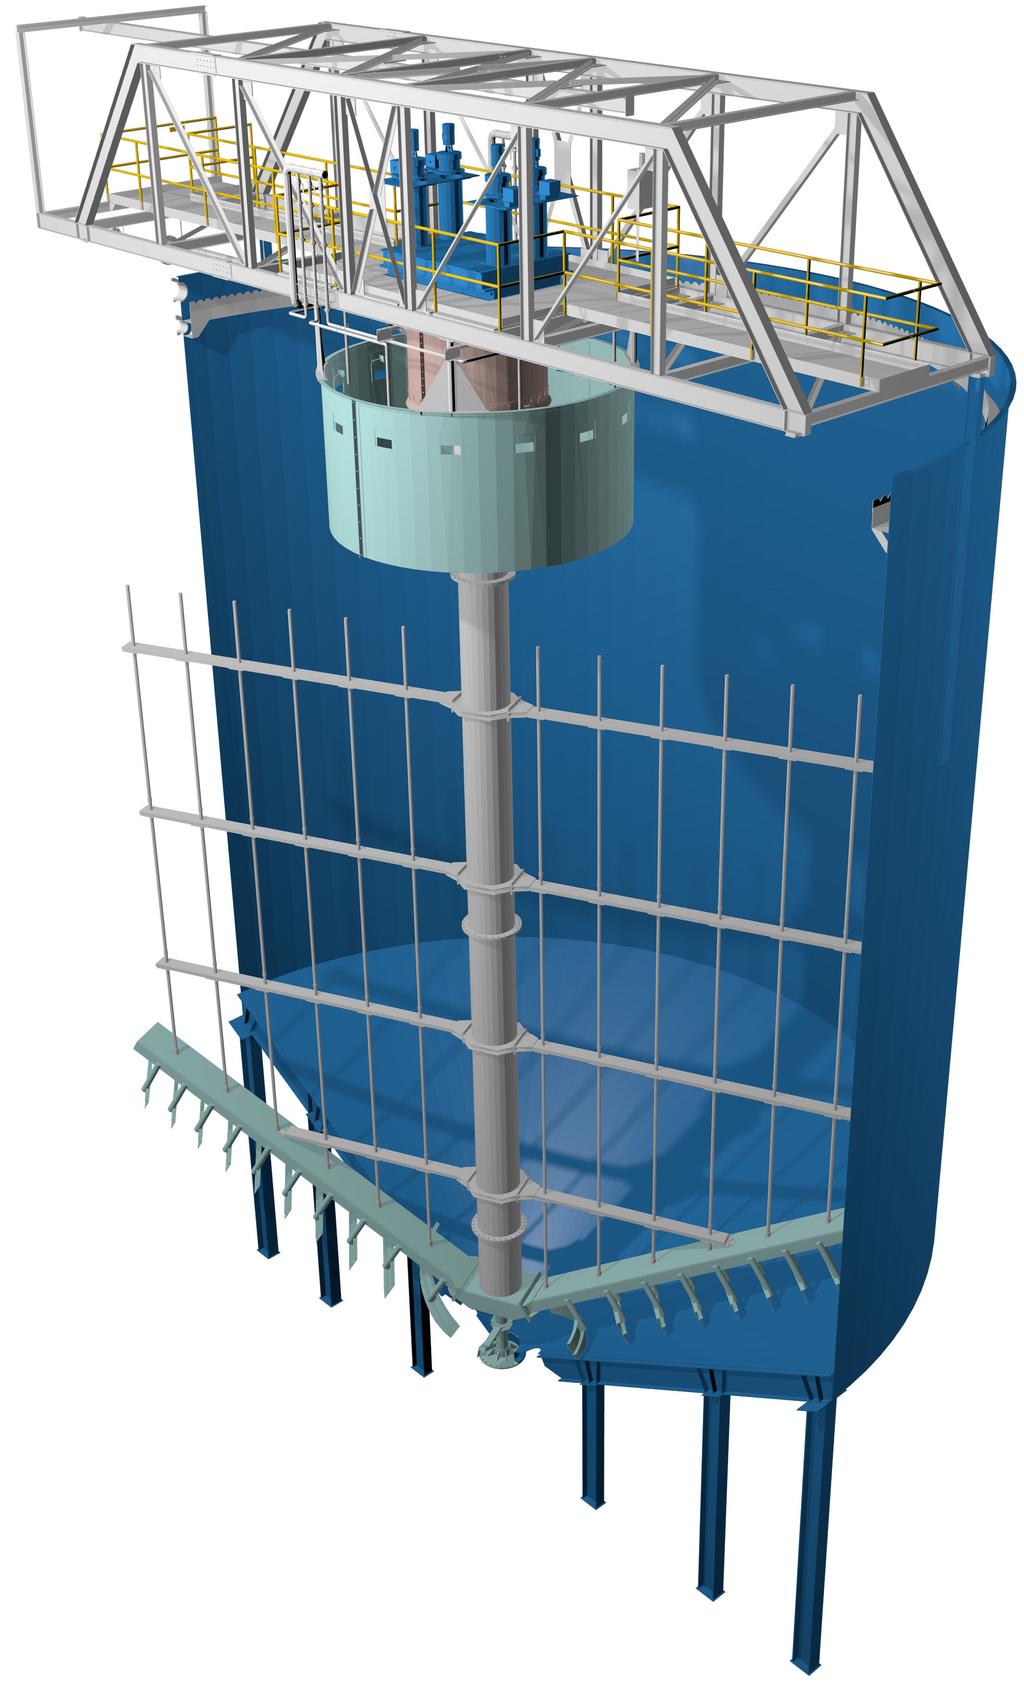 Heavy-duty Rake Drive Self-dilution for Optimal Flocculation Weir Overflow Launder Diameters up to 24m